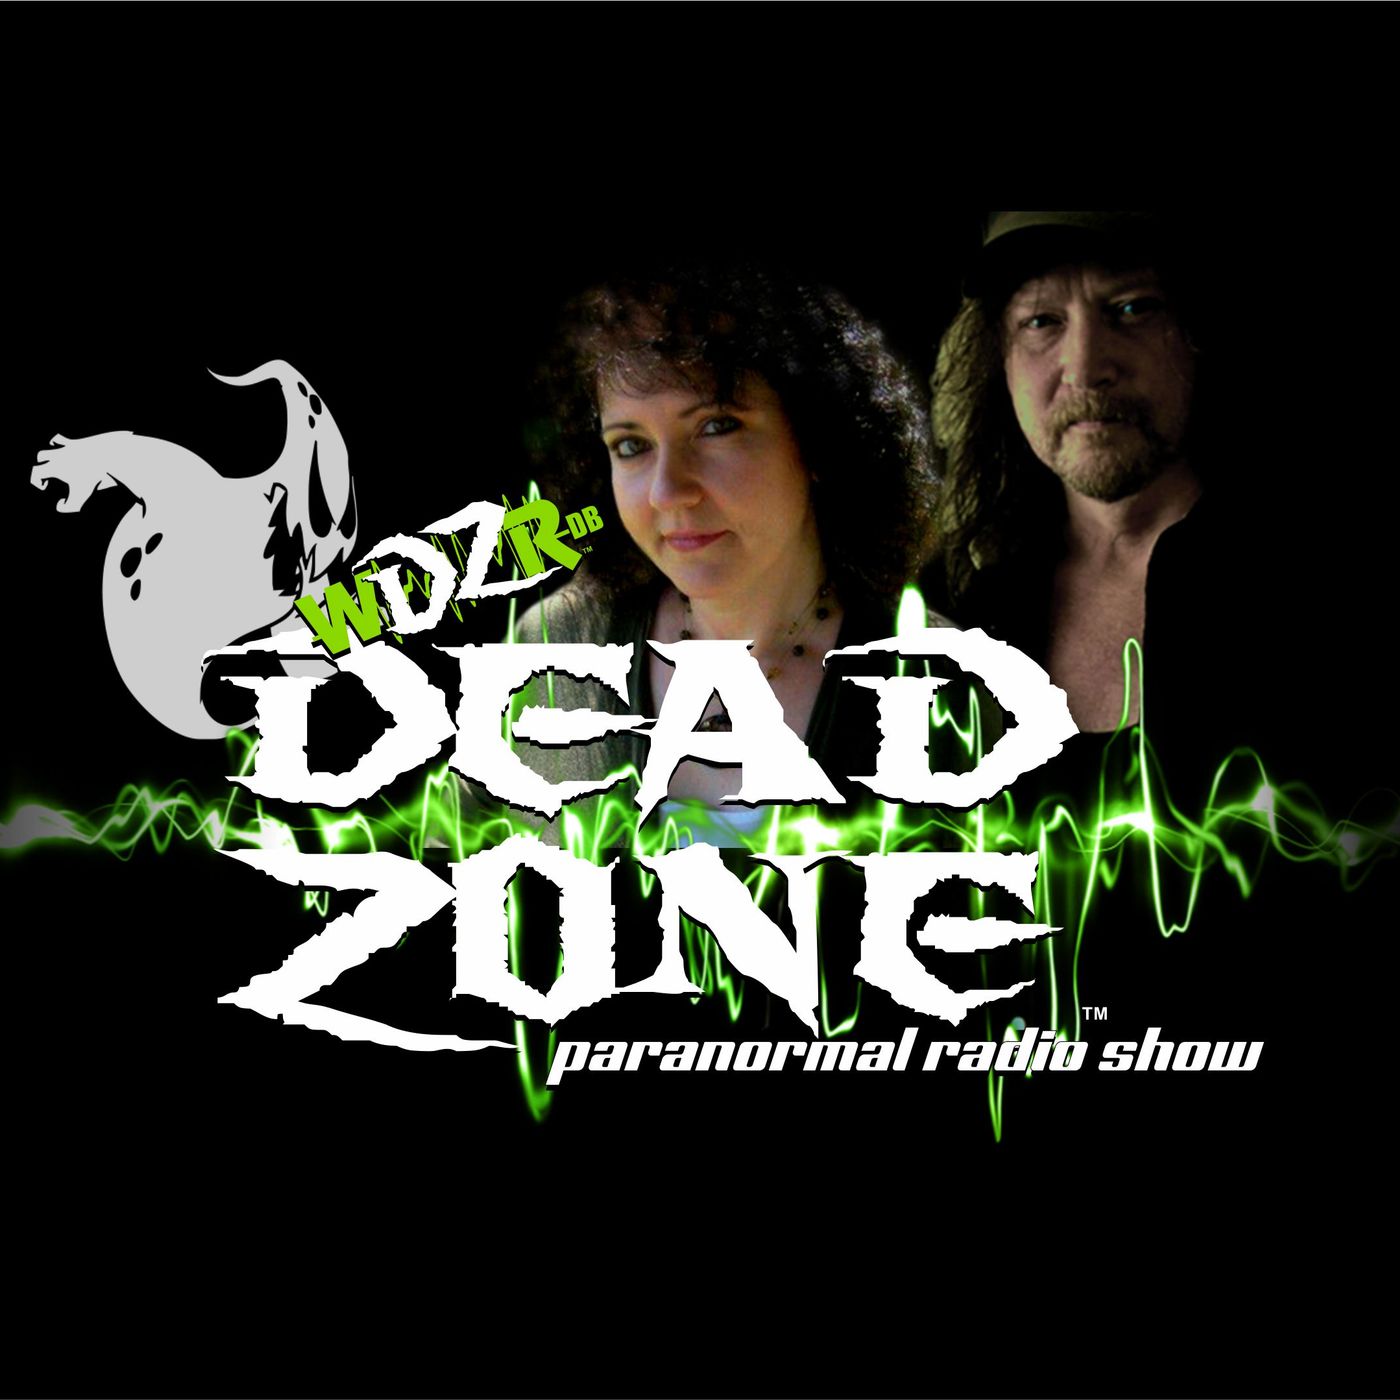 Dead_Zone_12_2_23_with_guest_Haunted_Journeys